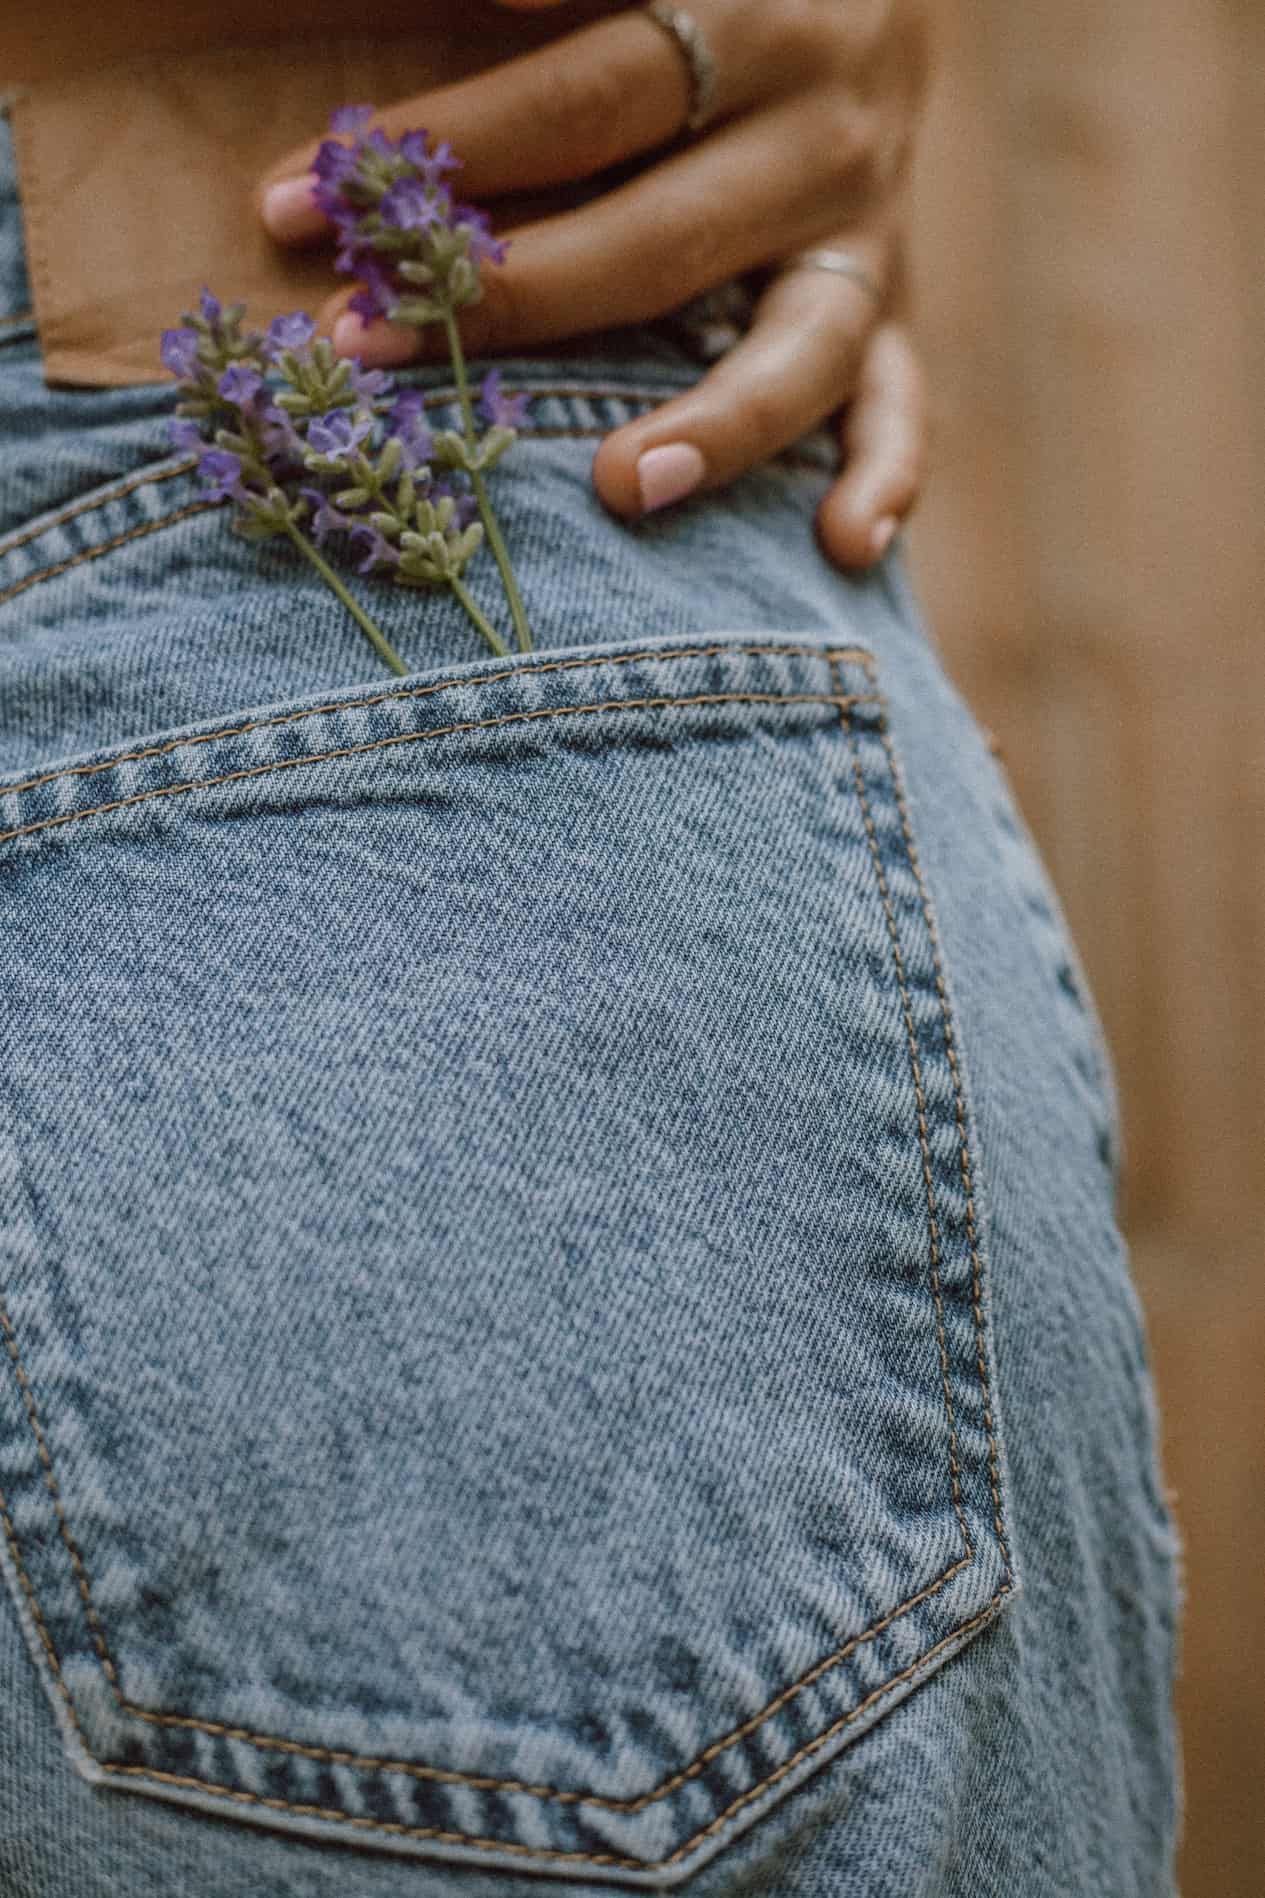 Close up image of the back jean pocket with lavender in the pocket.